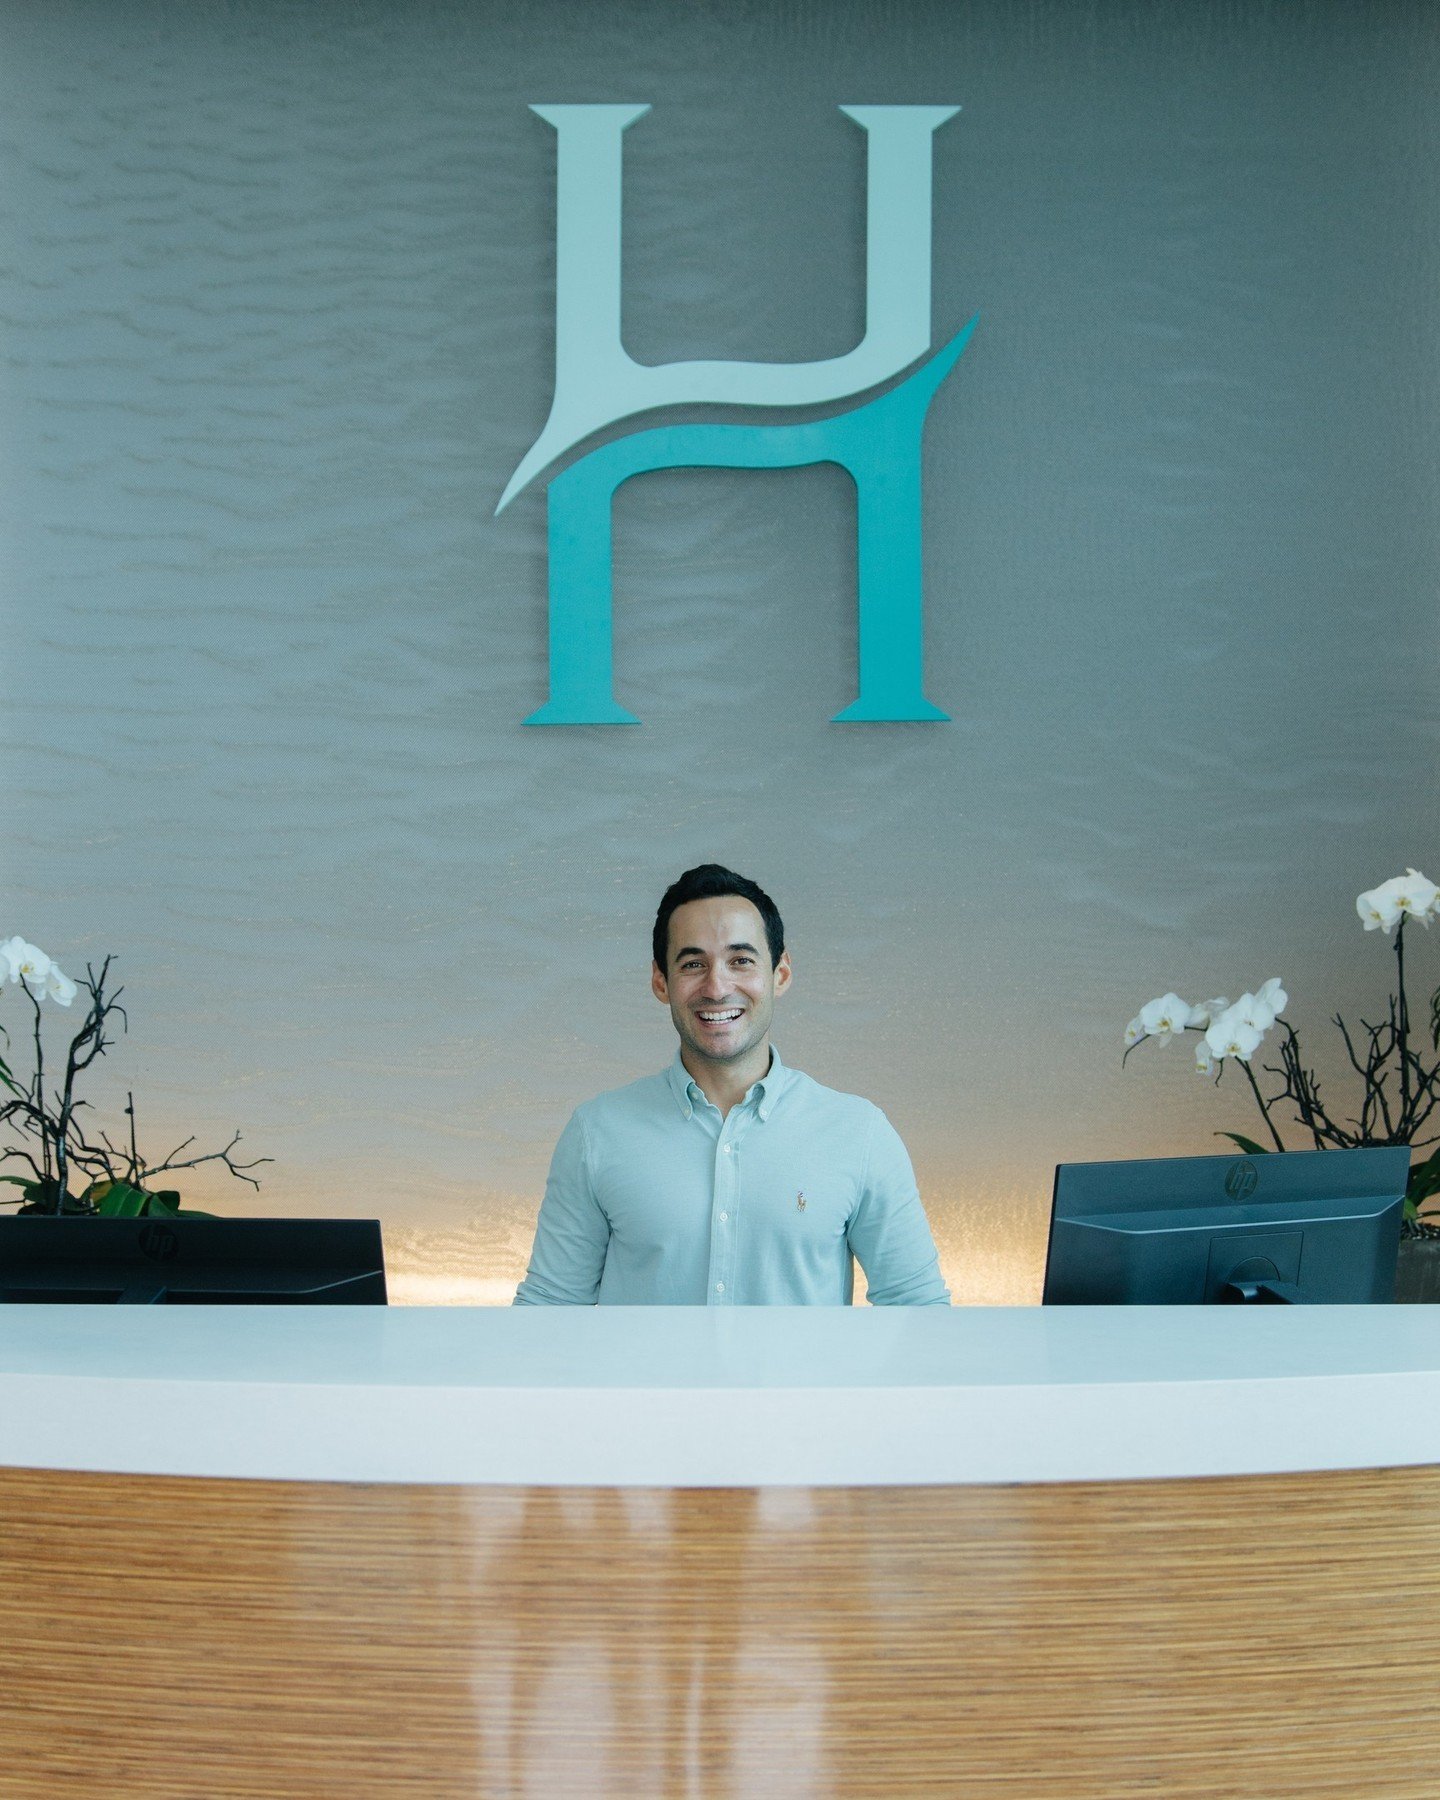 Check us out before we check you in. Our friendly H2O team is here to make your stay seamless, from recommending local spots to ensuring in-room comforts.